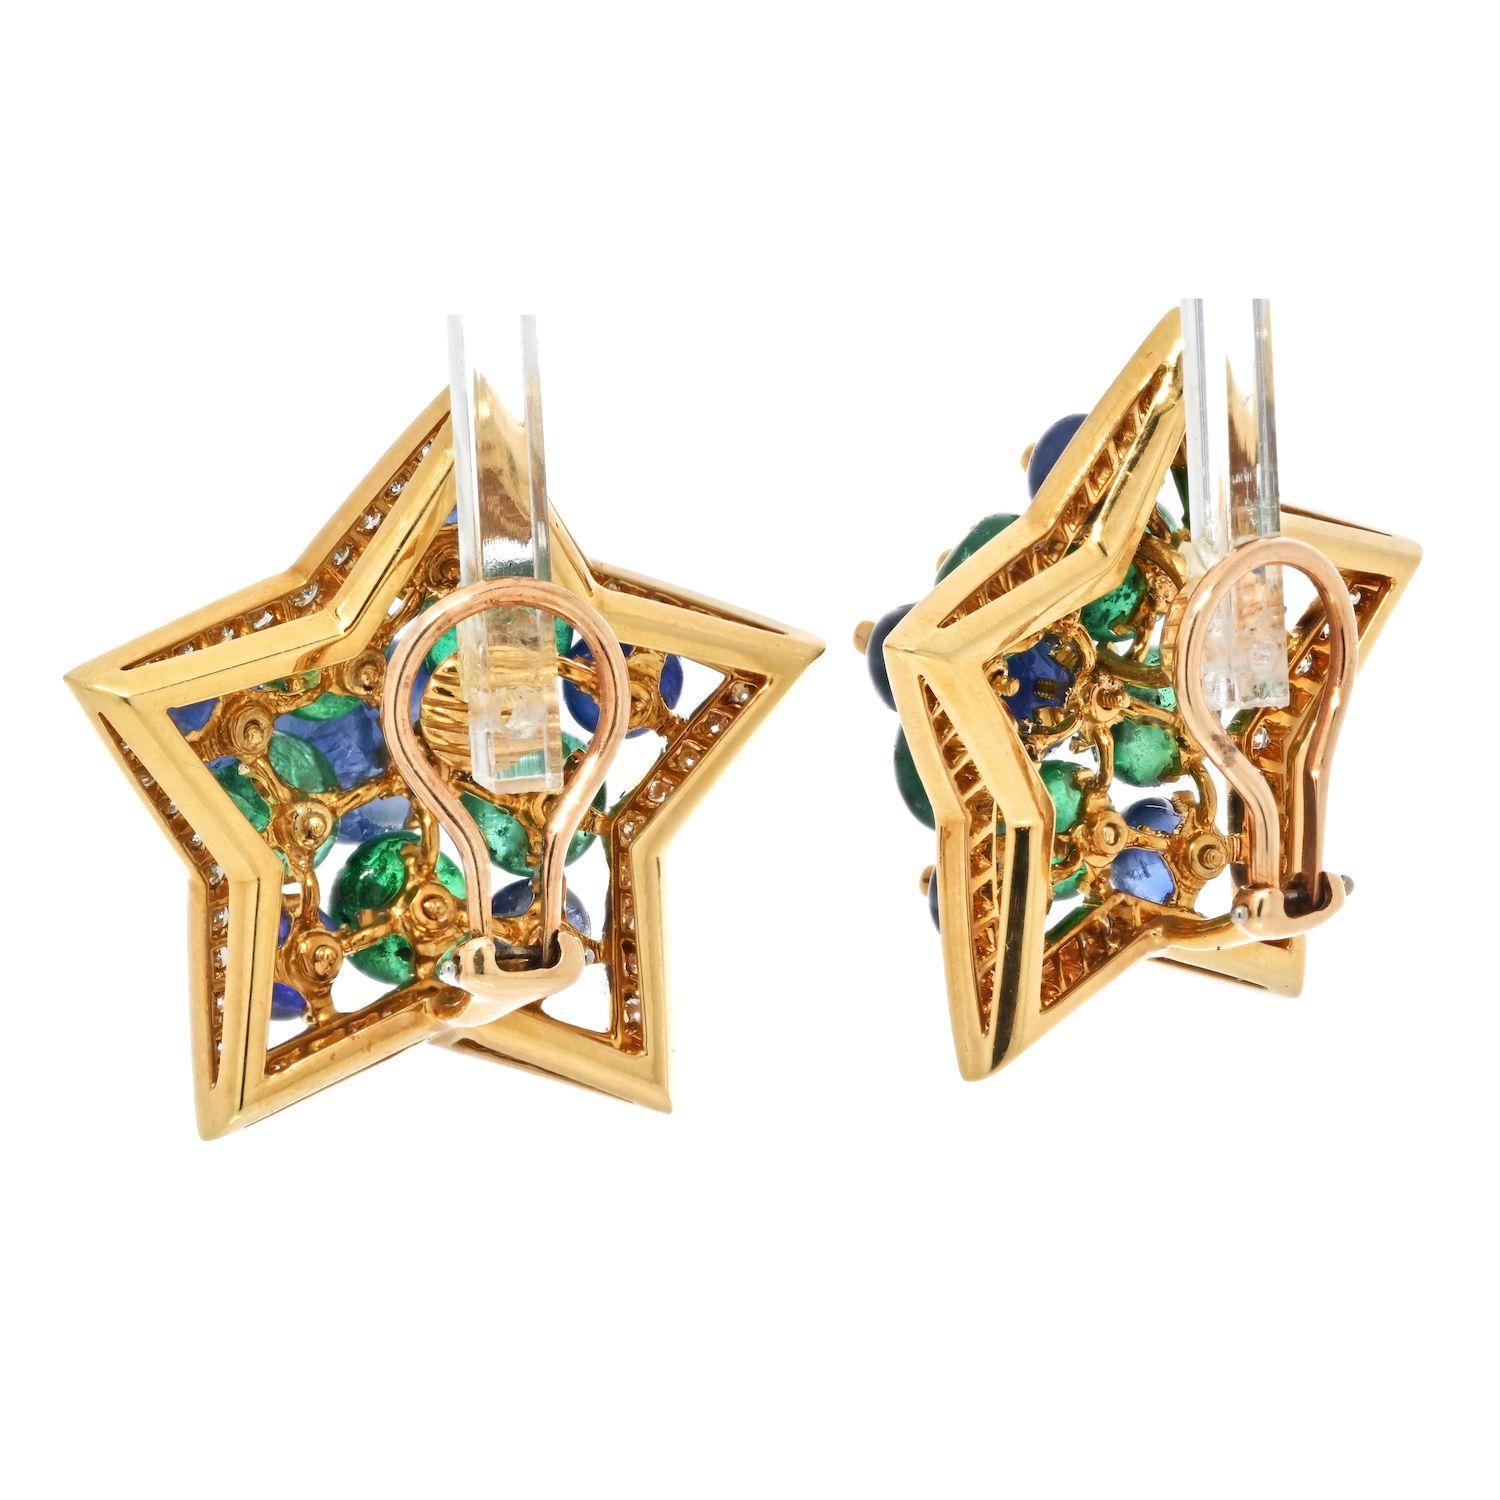 Estate 18k yellow gold clip earrings mounted with sapphires, emeralds and diamonds. These are lovely earrings made with translucent green emeralds and medium deep hue sapphires. Round cut diamonds paved on a frame of each star making these beautie